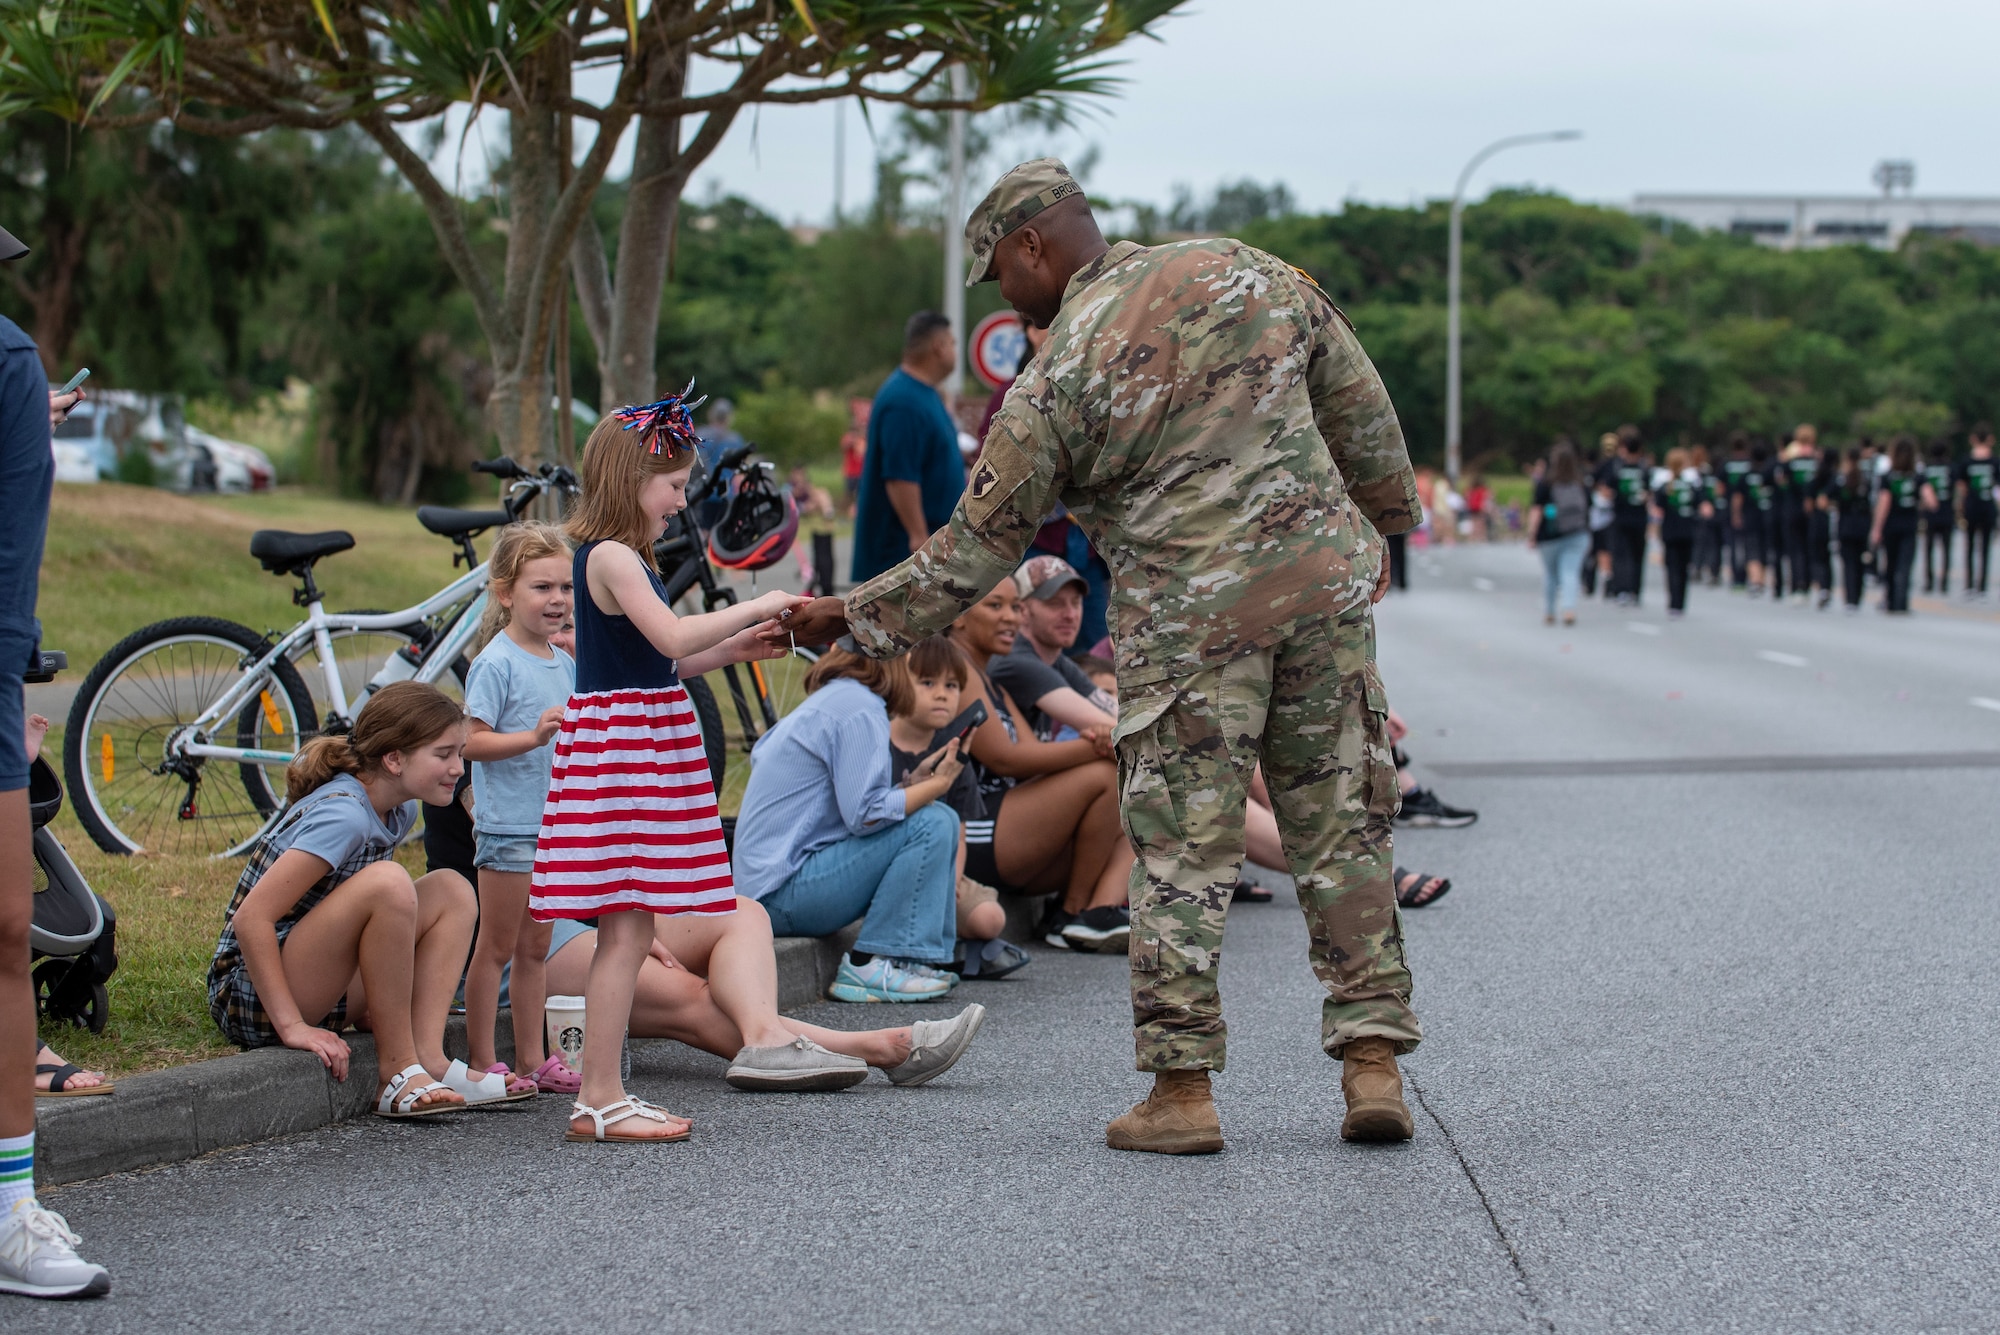 Service members hand out candy to spectators during Kadena Air Base's Veteran's day parade